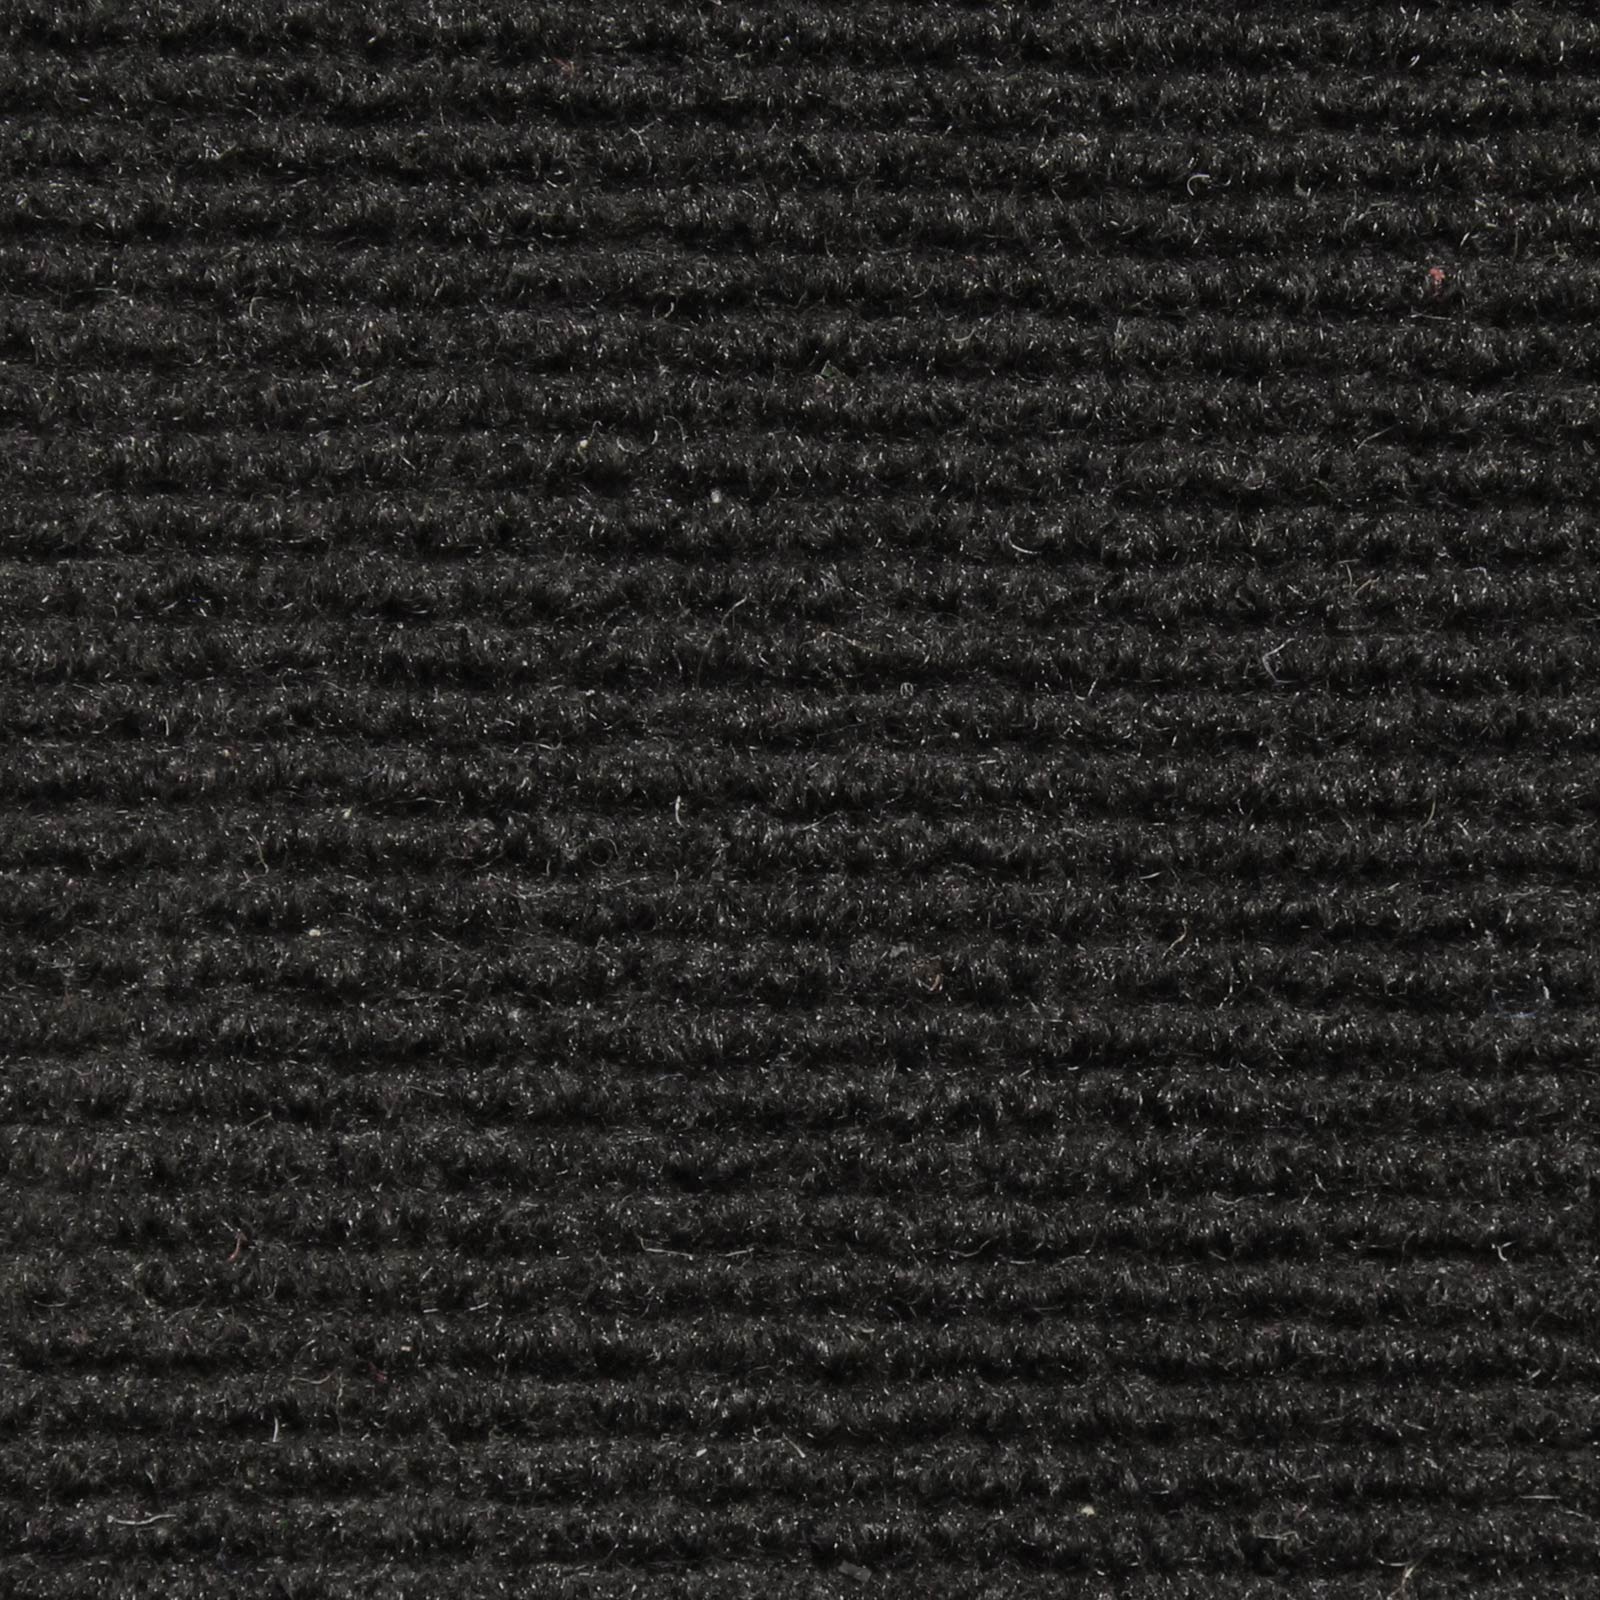 House, Home and More Indoor/Outdoor Carpet - Black - 6' x 35'